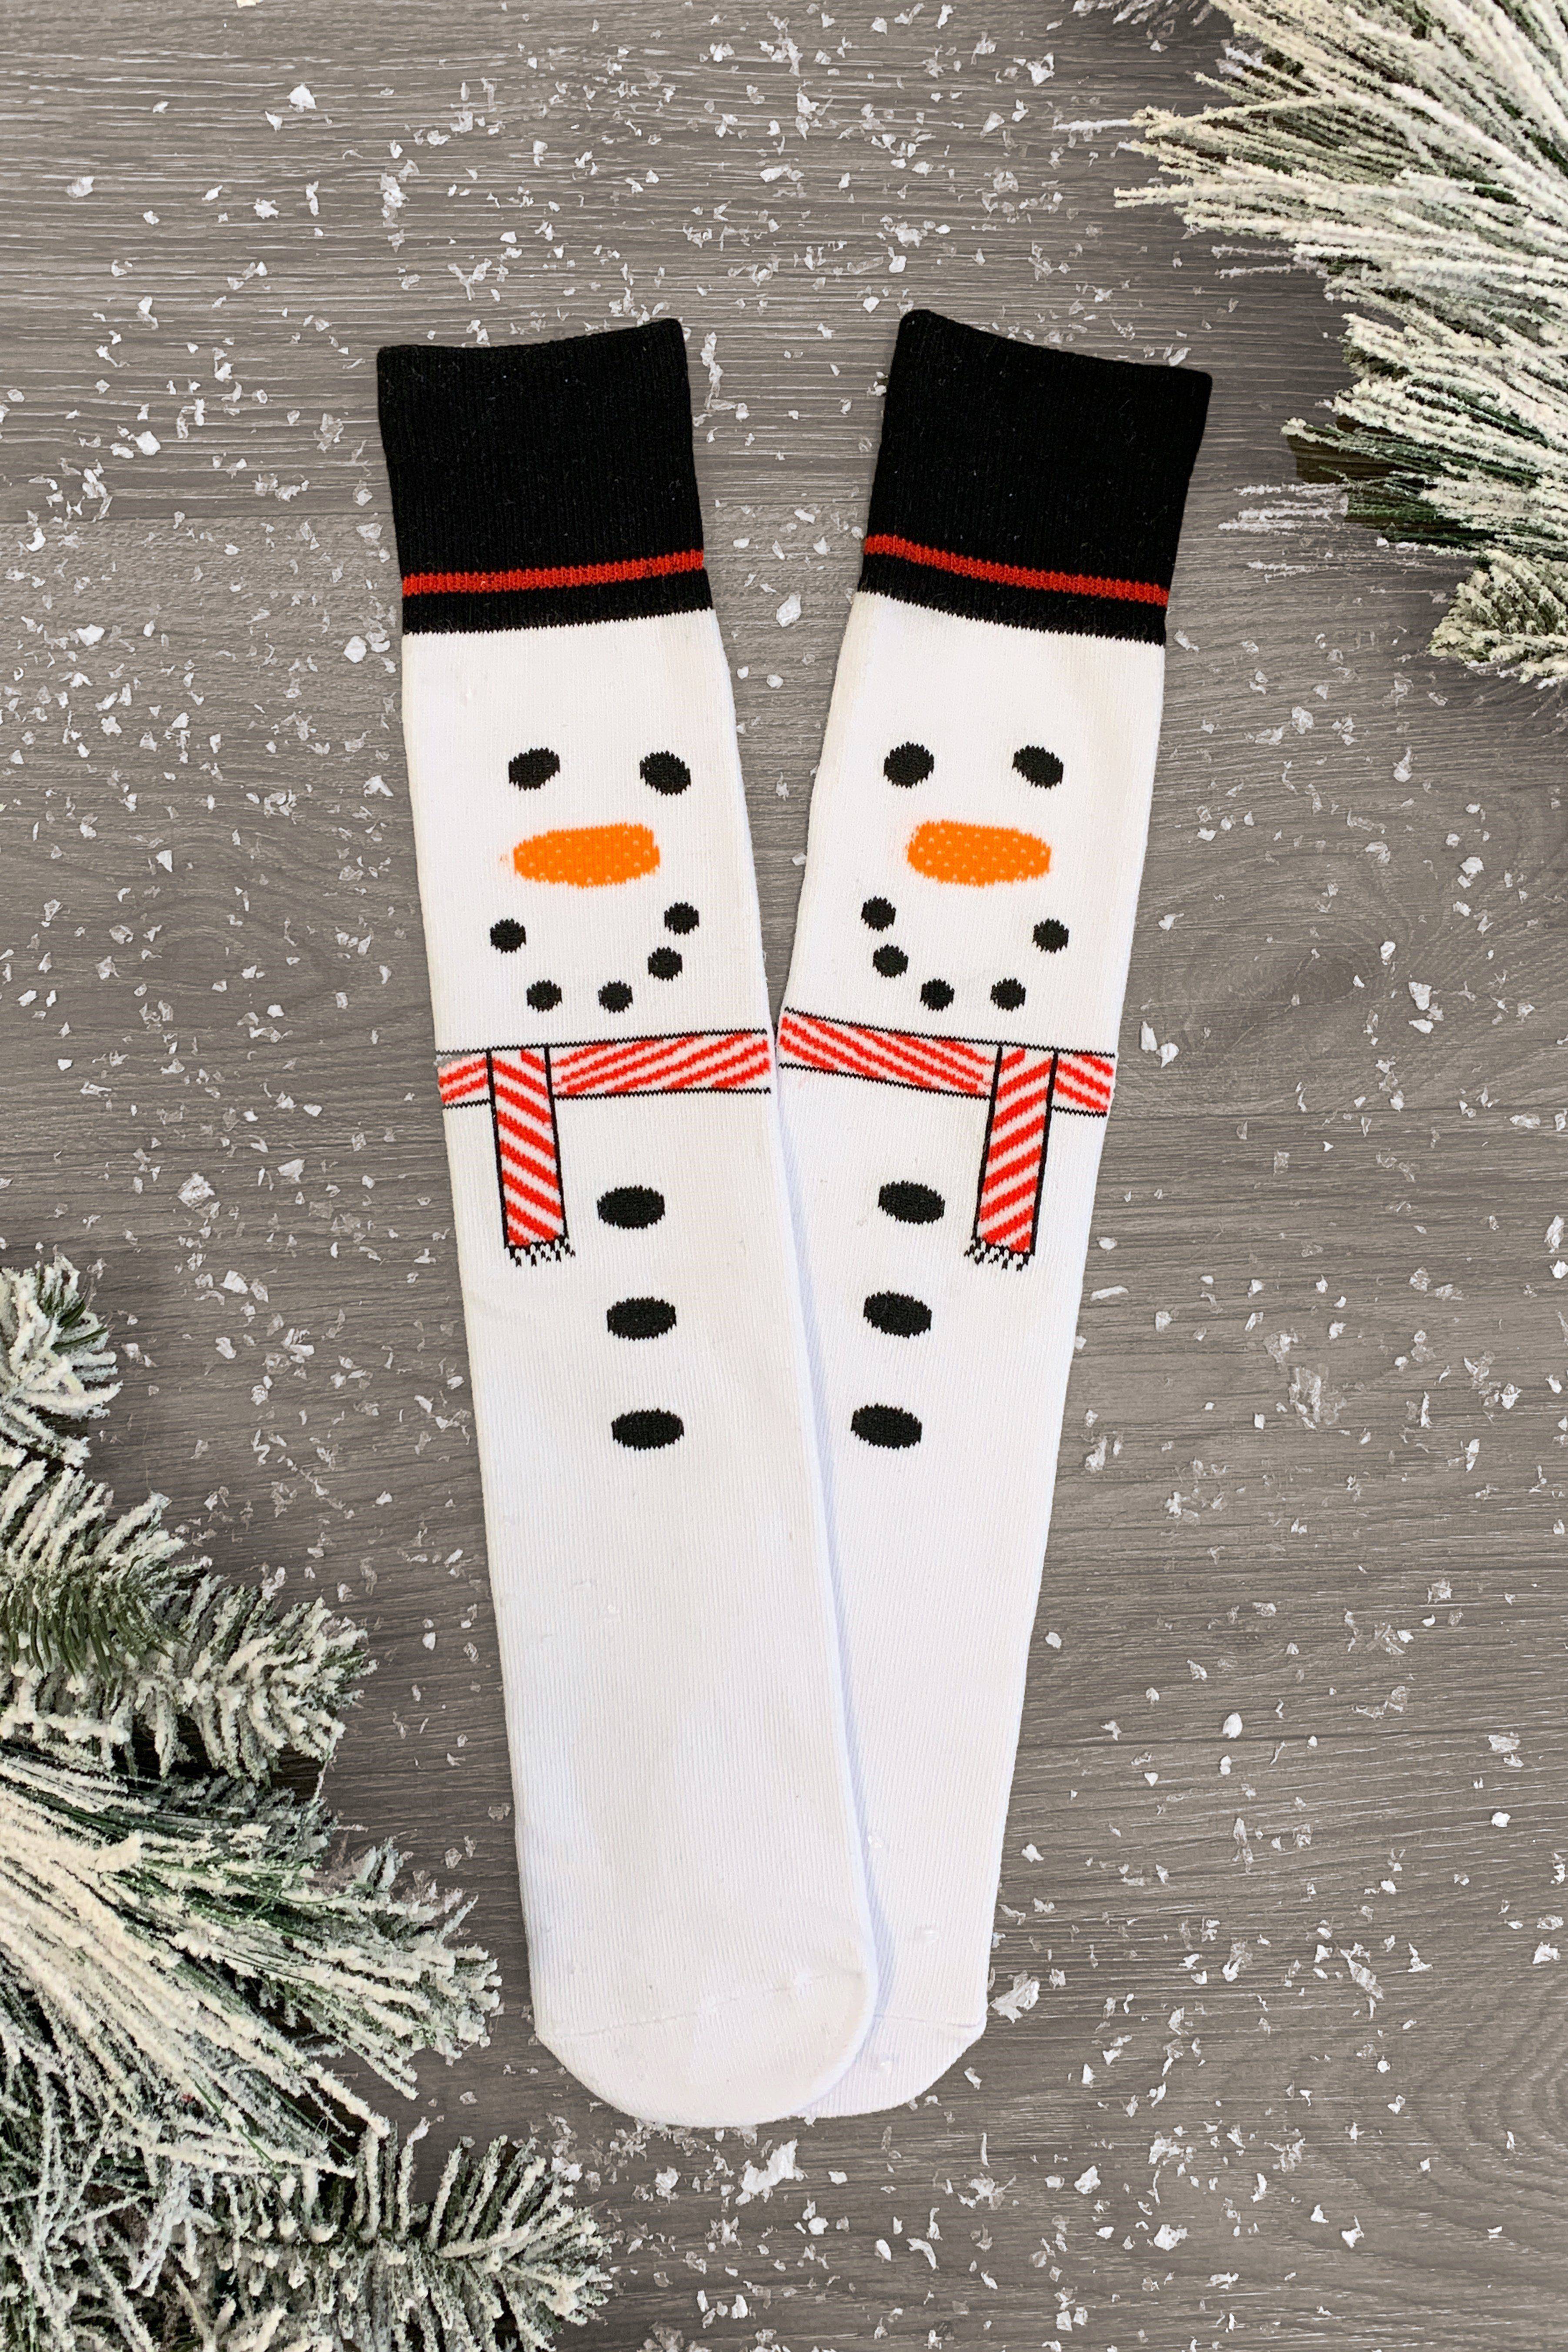 winter tights,red tights,snowman tights,red and white tights with